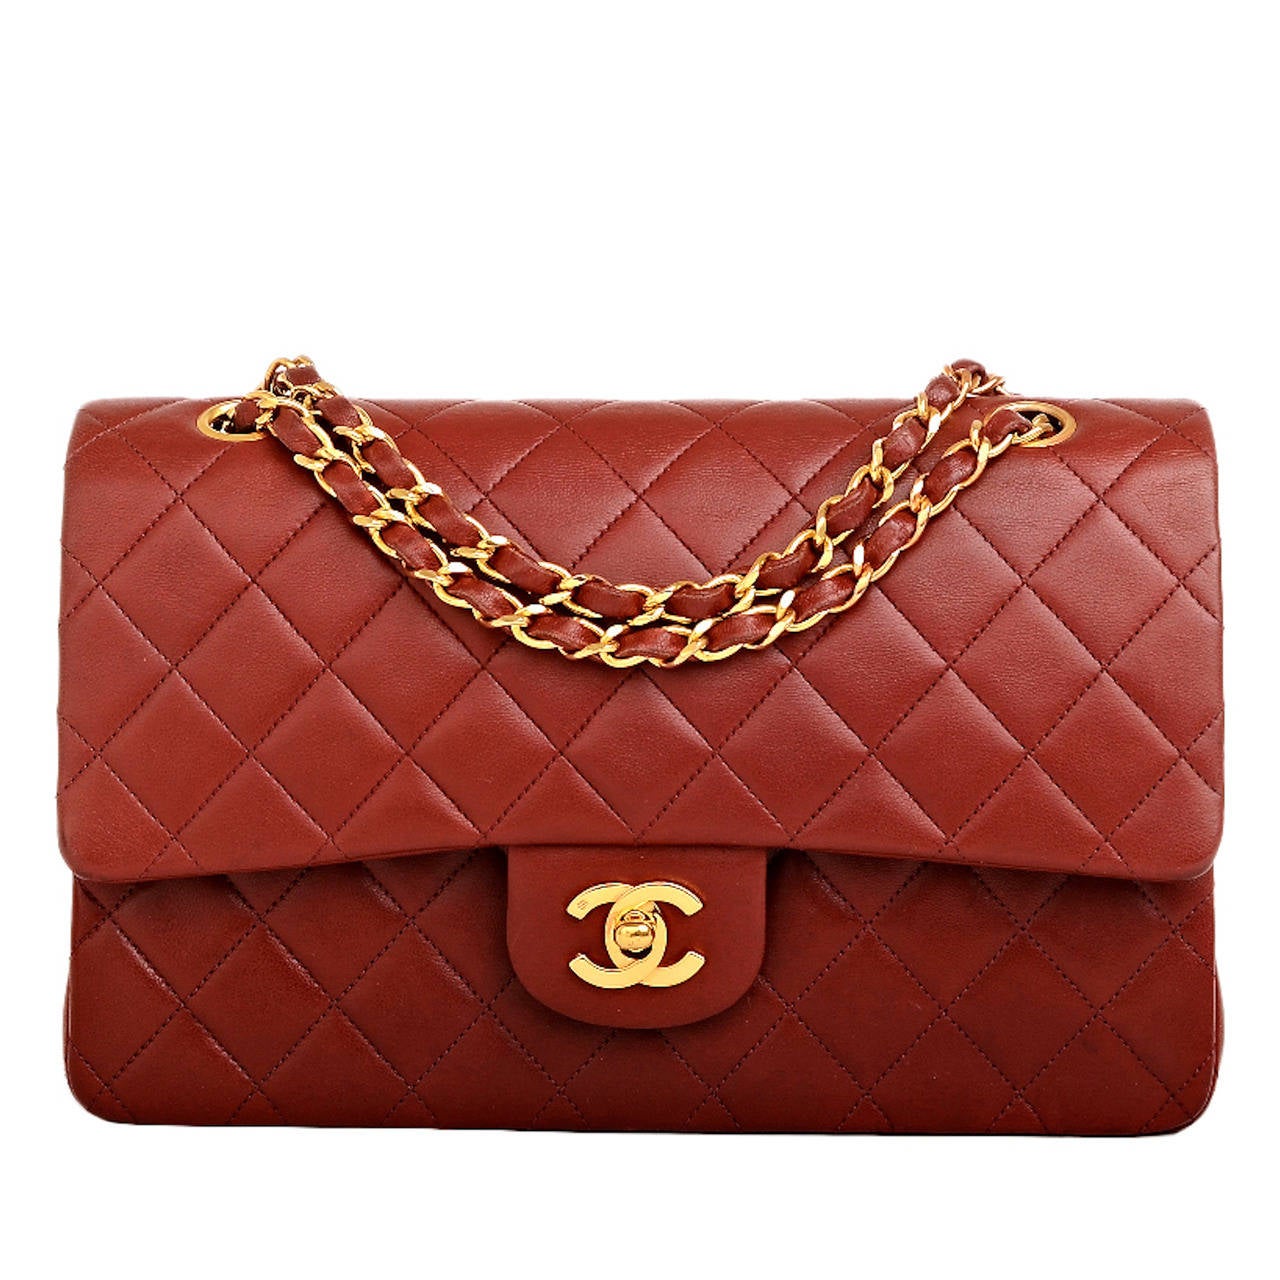 Chanel Vintage Dark Red Lambskin Large Classic Double Flap Bag